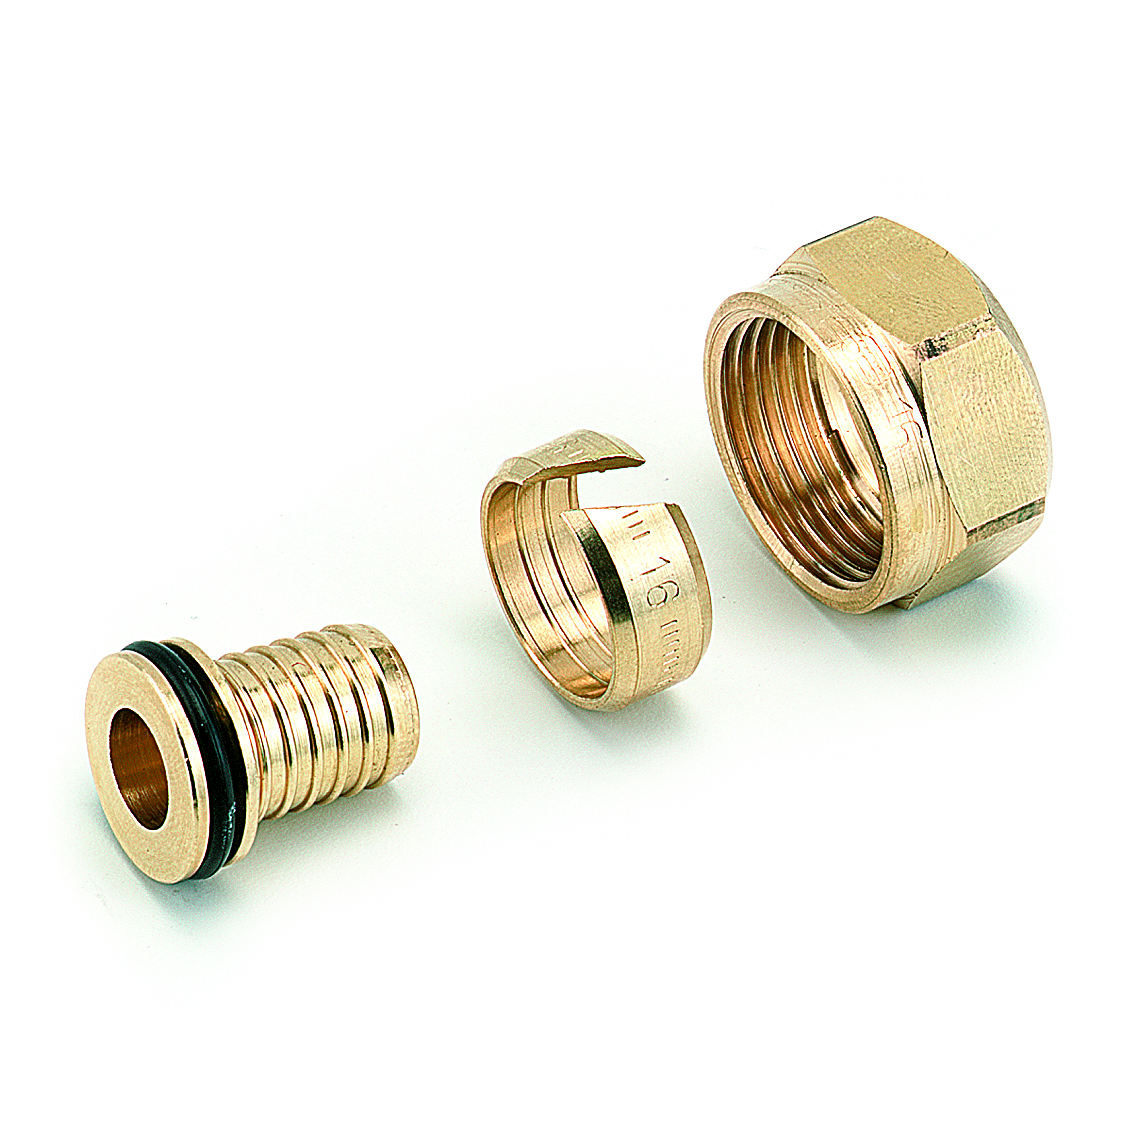 825P - Compression fitting M22 (brass finish) for PEX pipes